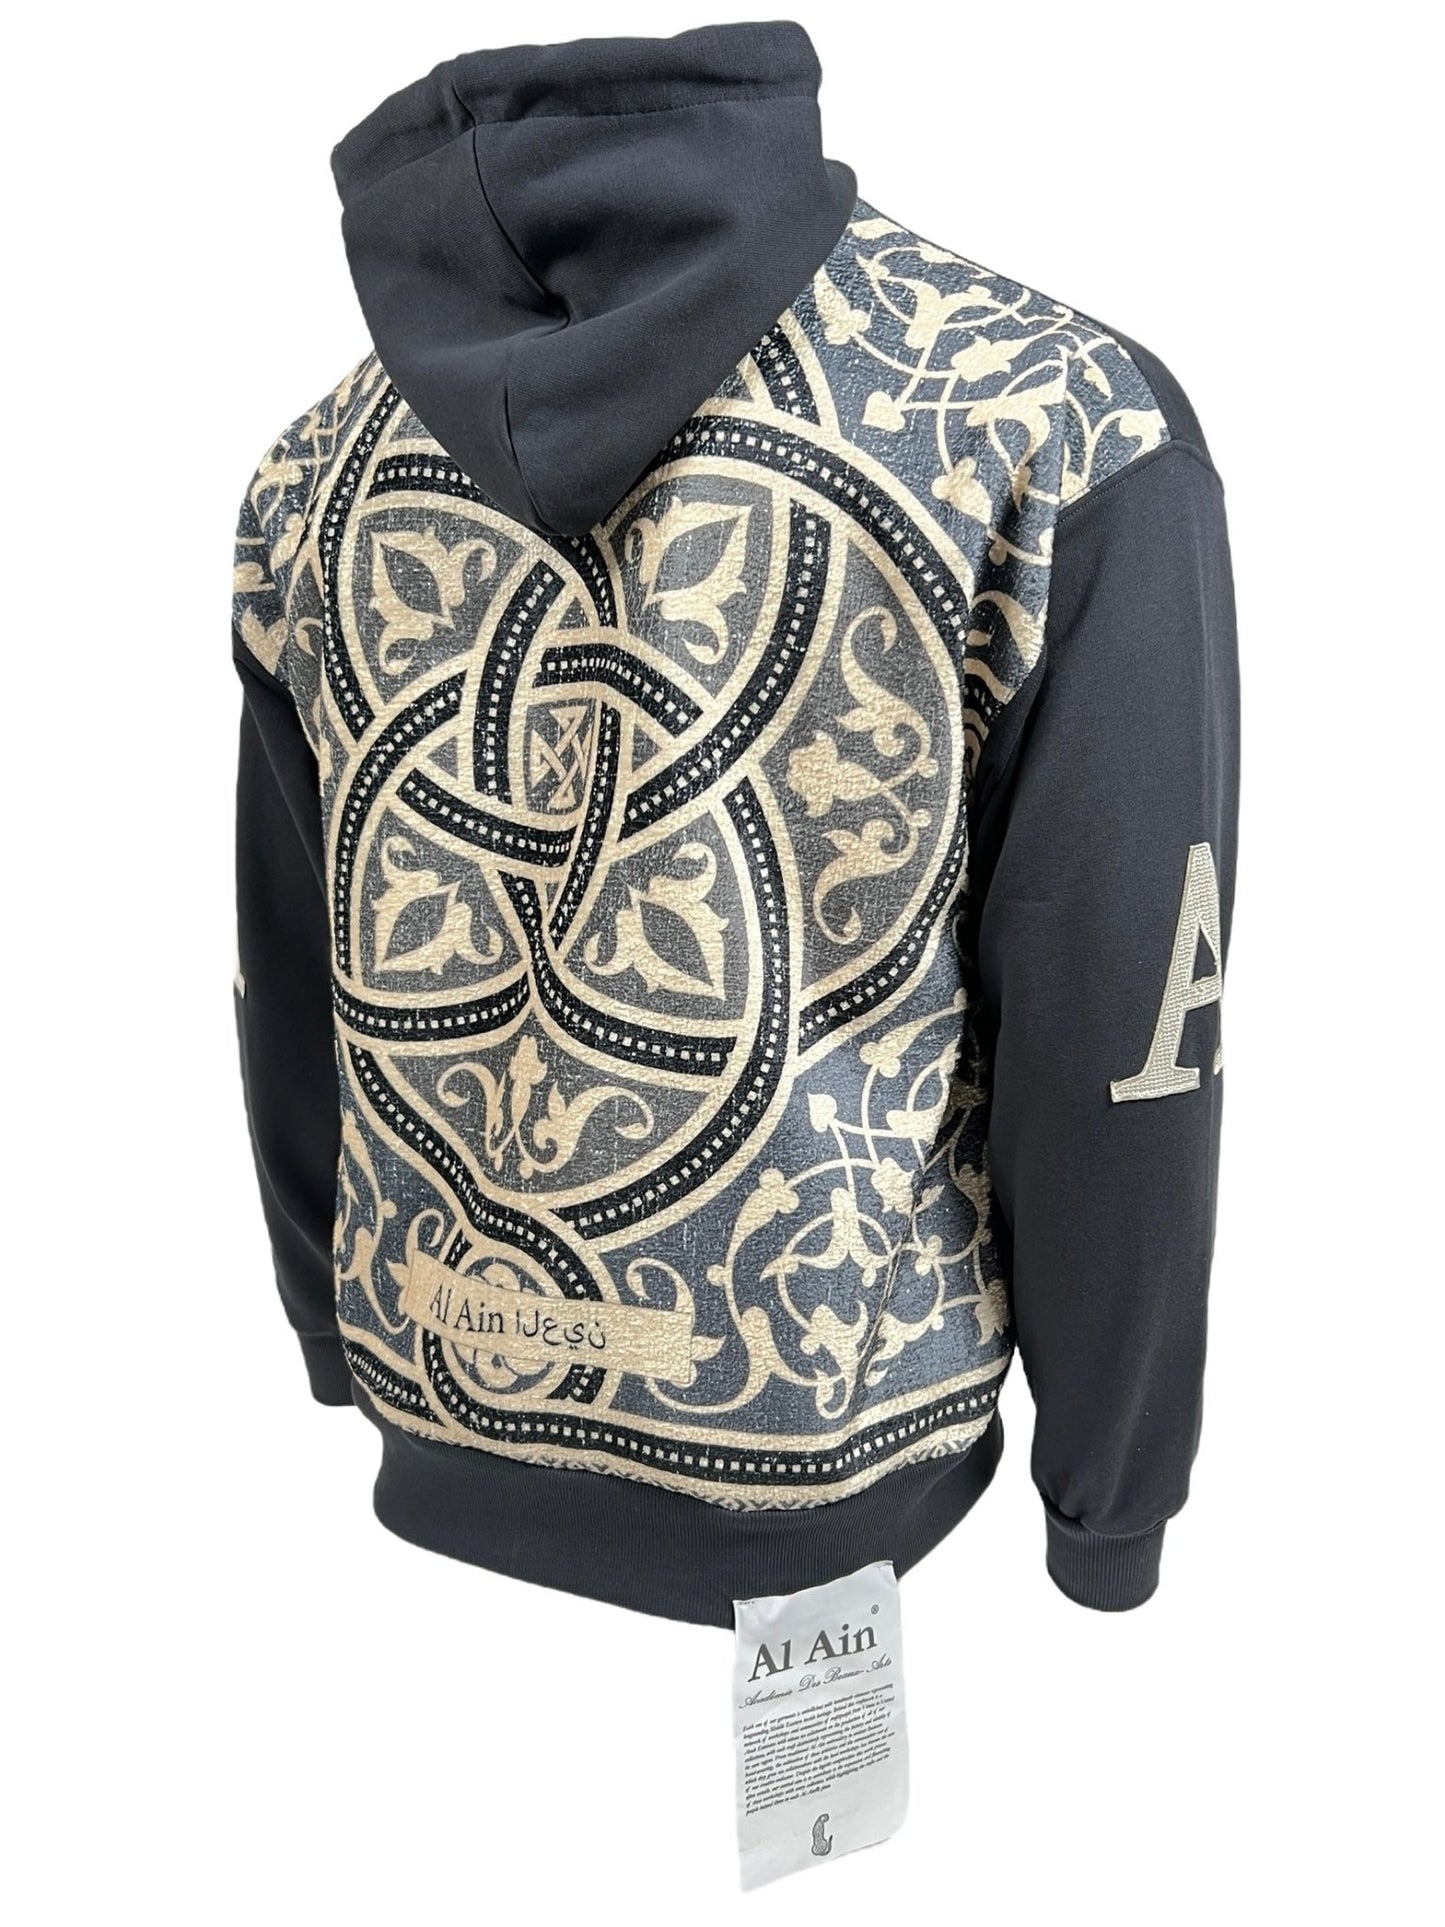 Rear view of a 100% cotton, hooded sweatshirt with intricate beige and black patterns and the text "AHZX S103 SECRET NOIR" on the sleeves, displayed on a mannequin.